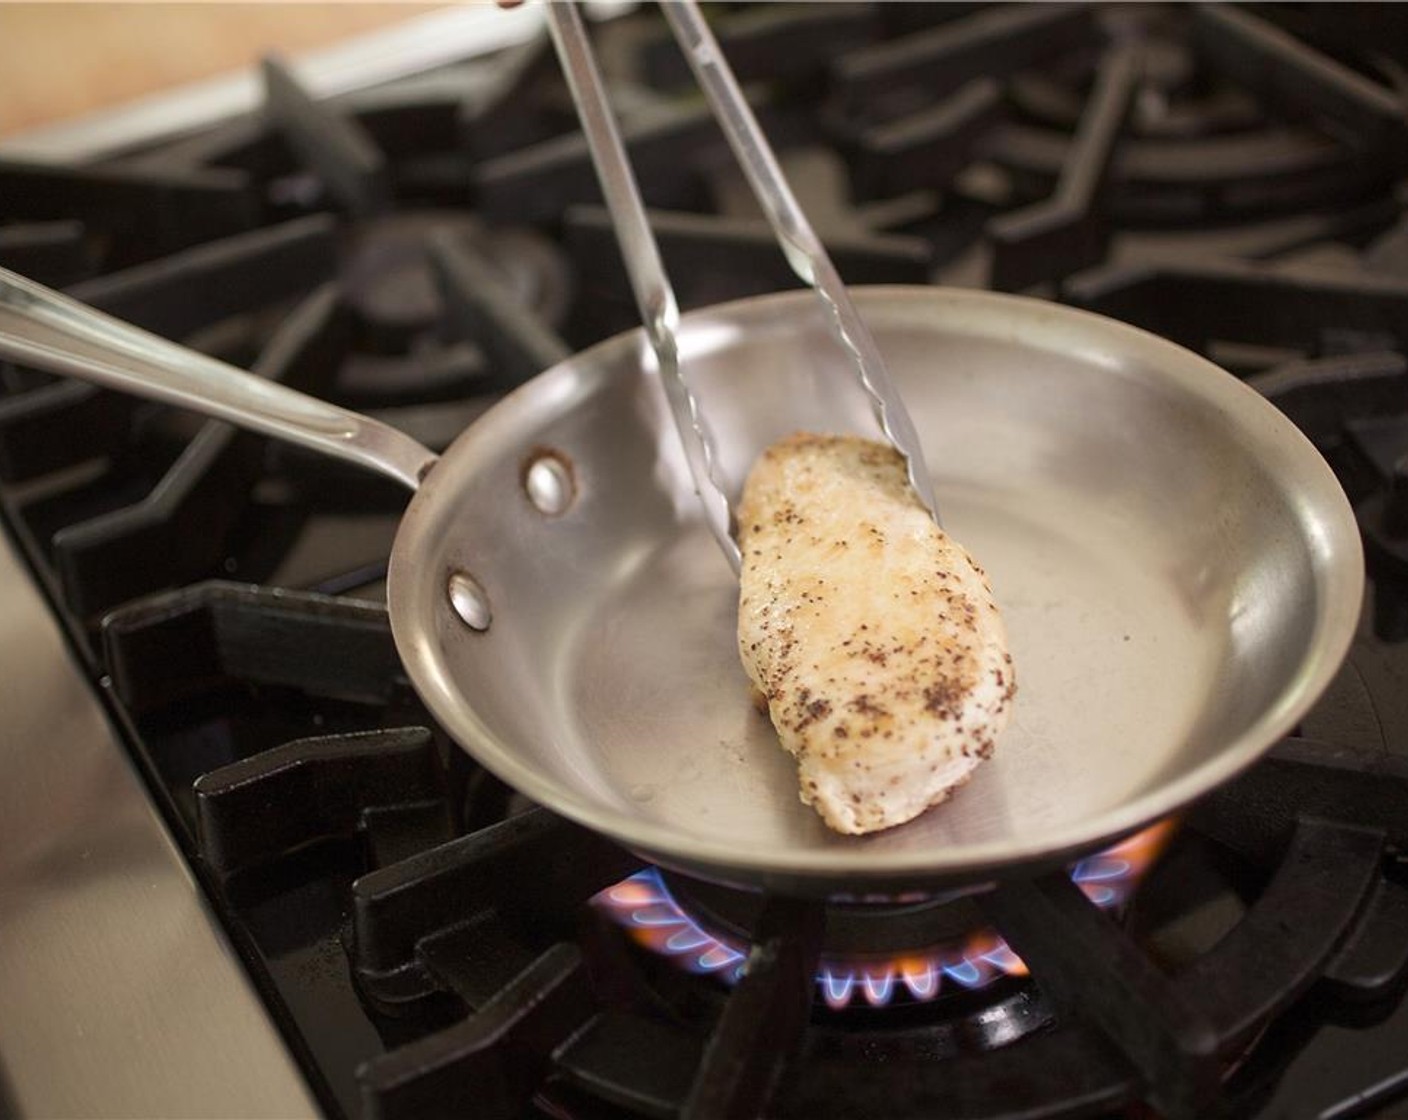 step 5 In a medium saute pan over medium-high heat, add 1 teaspoon of olive oil. When the oil is hot, add the chicken and sear on each side for 4 minutes. Remove from heat to cool.